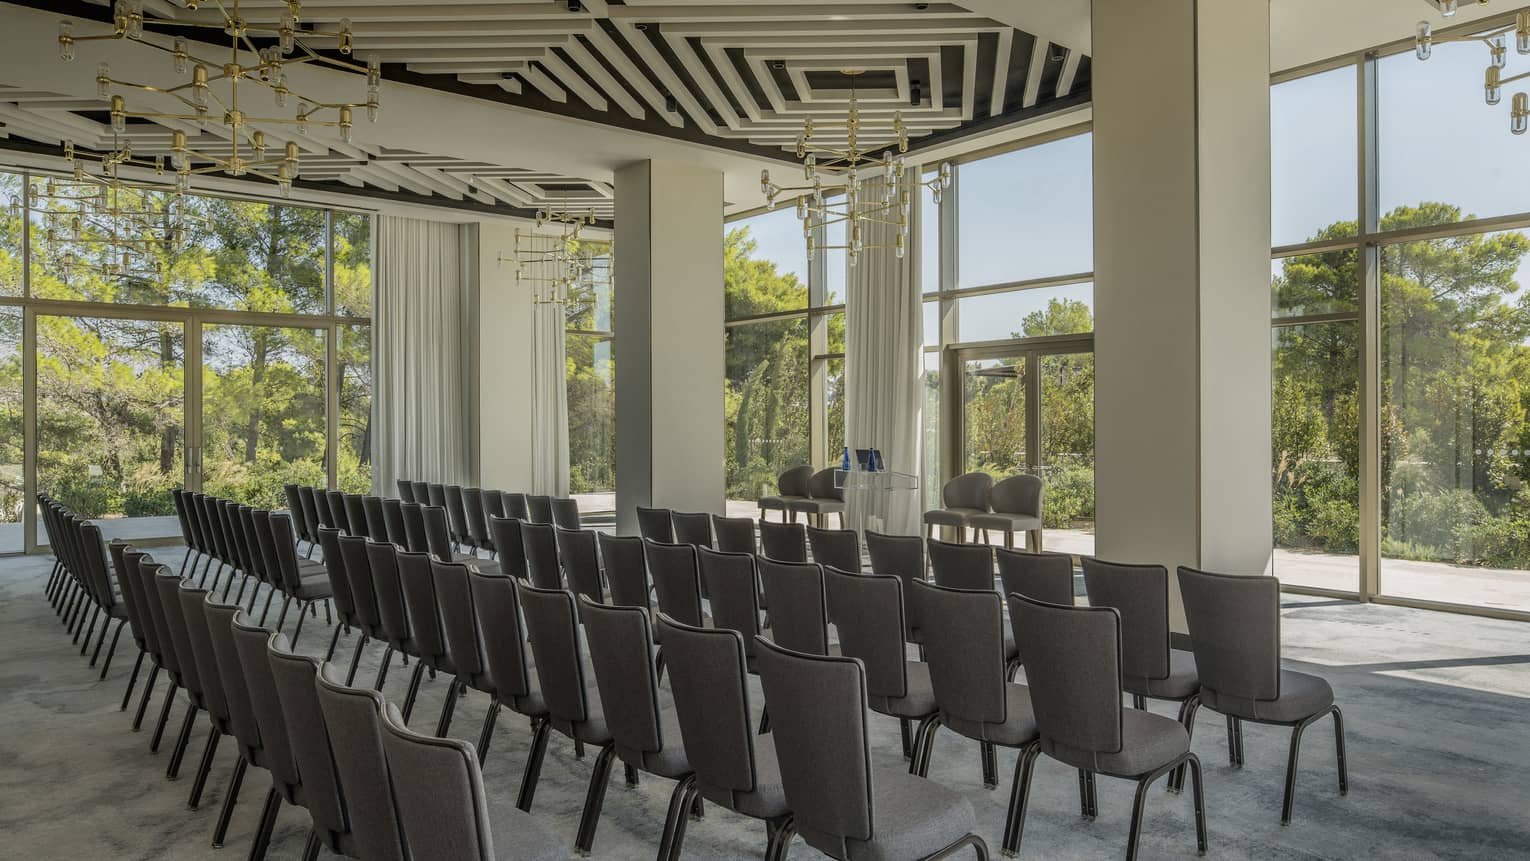 Four rows of chairs in light-filled Arion Ballroom with modern light fixtures overlooking trees